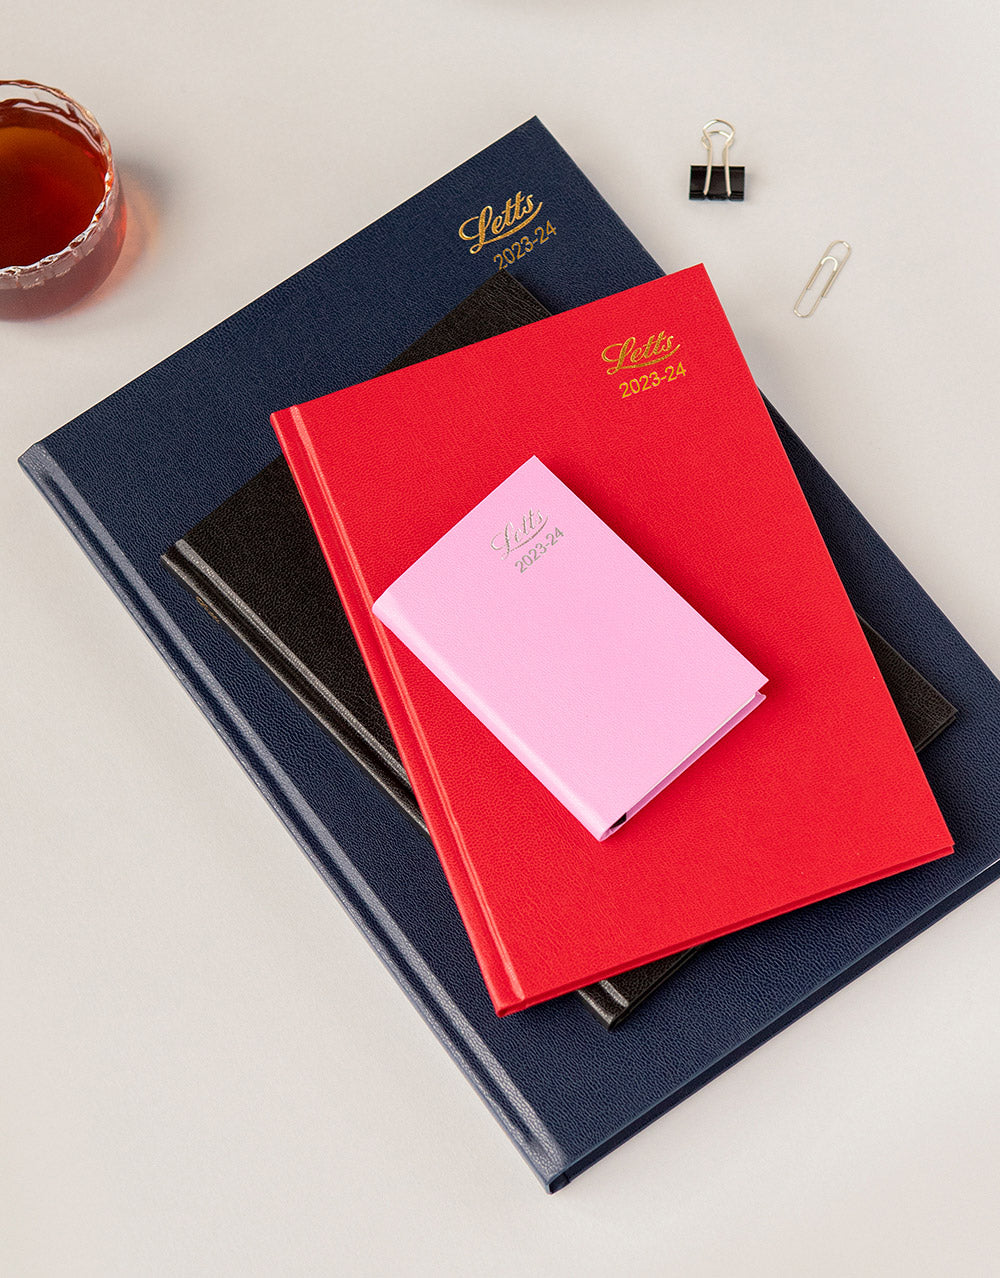 Standard A5 Day to a Page Diary with Appointments 2023-2024 - English - Red - Letts of London#colour_red